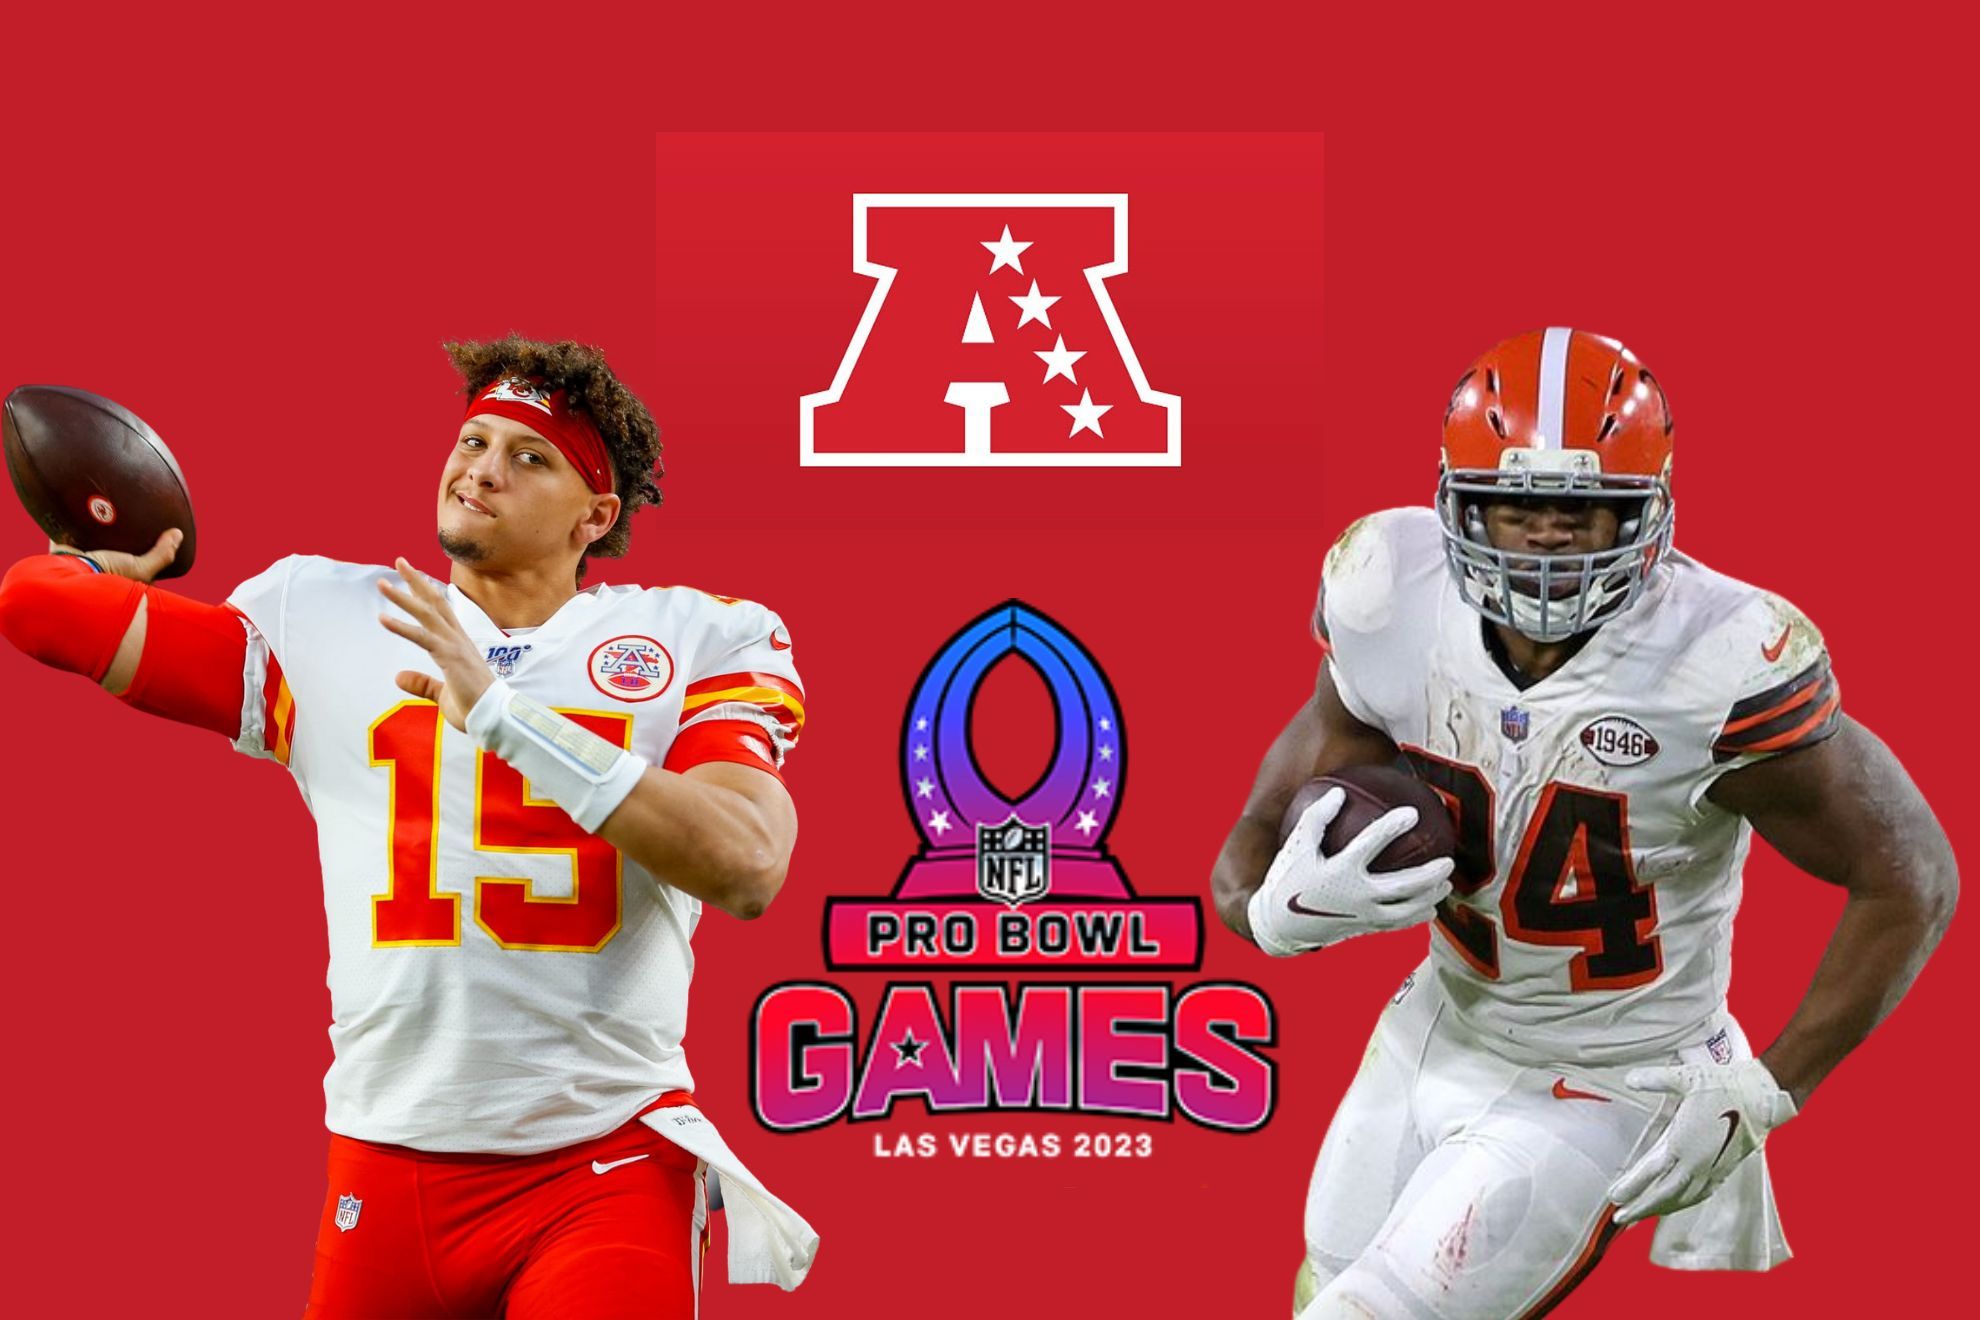 Patrick Mahomes (QB) and Nick Chubb (RB) will start for the AFC in the Las Vegas 2023 Pro Bowl Games.